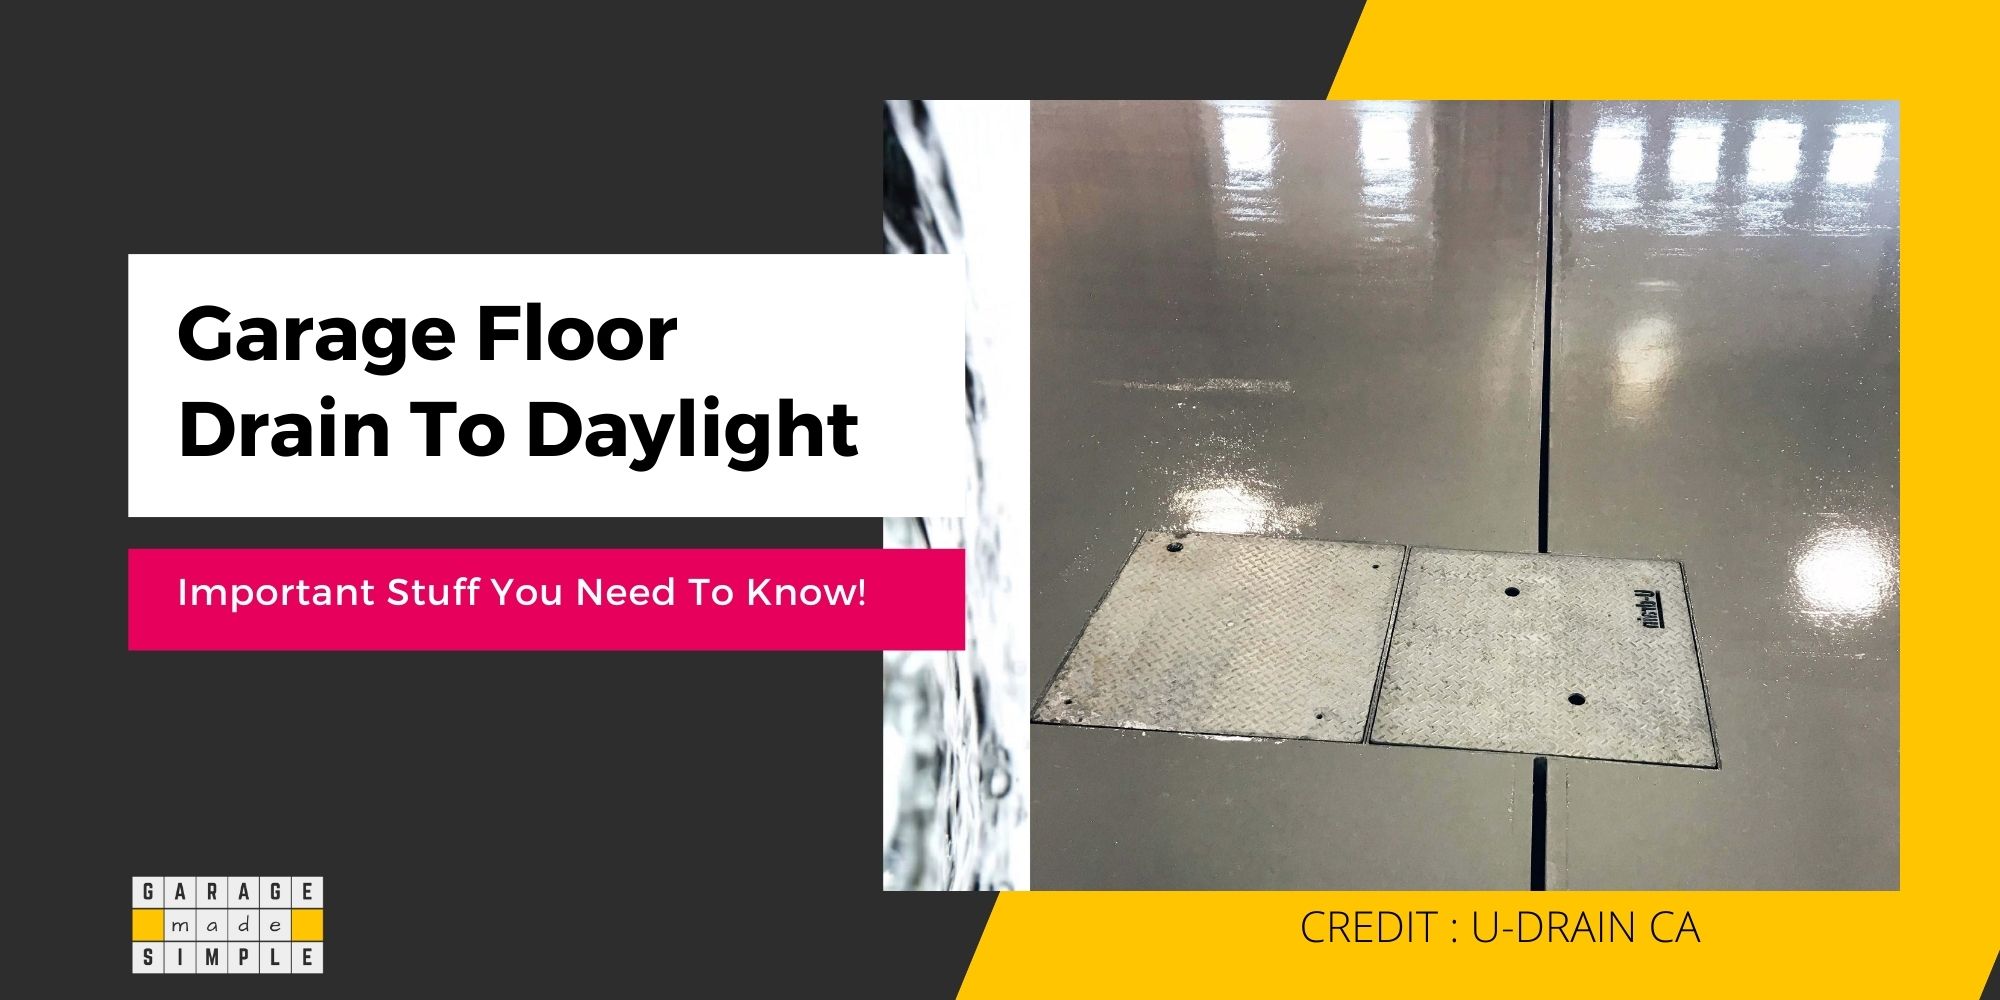 Garage Floor Drain To Daylight: 5 Fantastic Facts To Know!